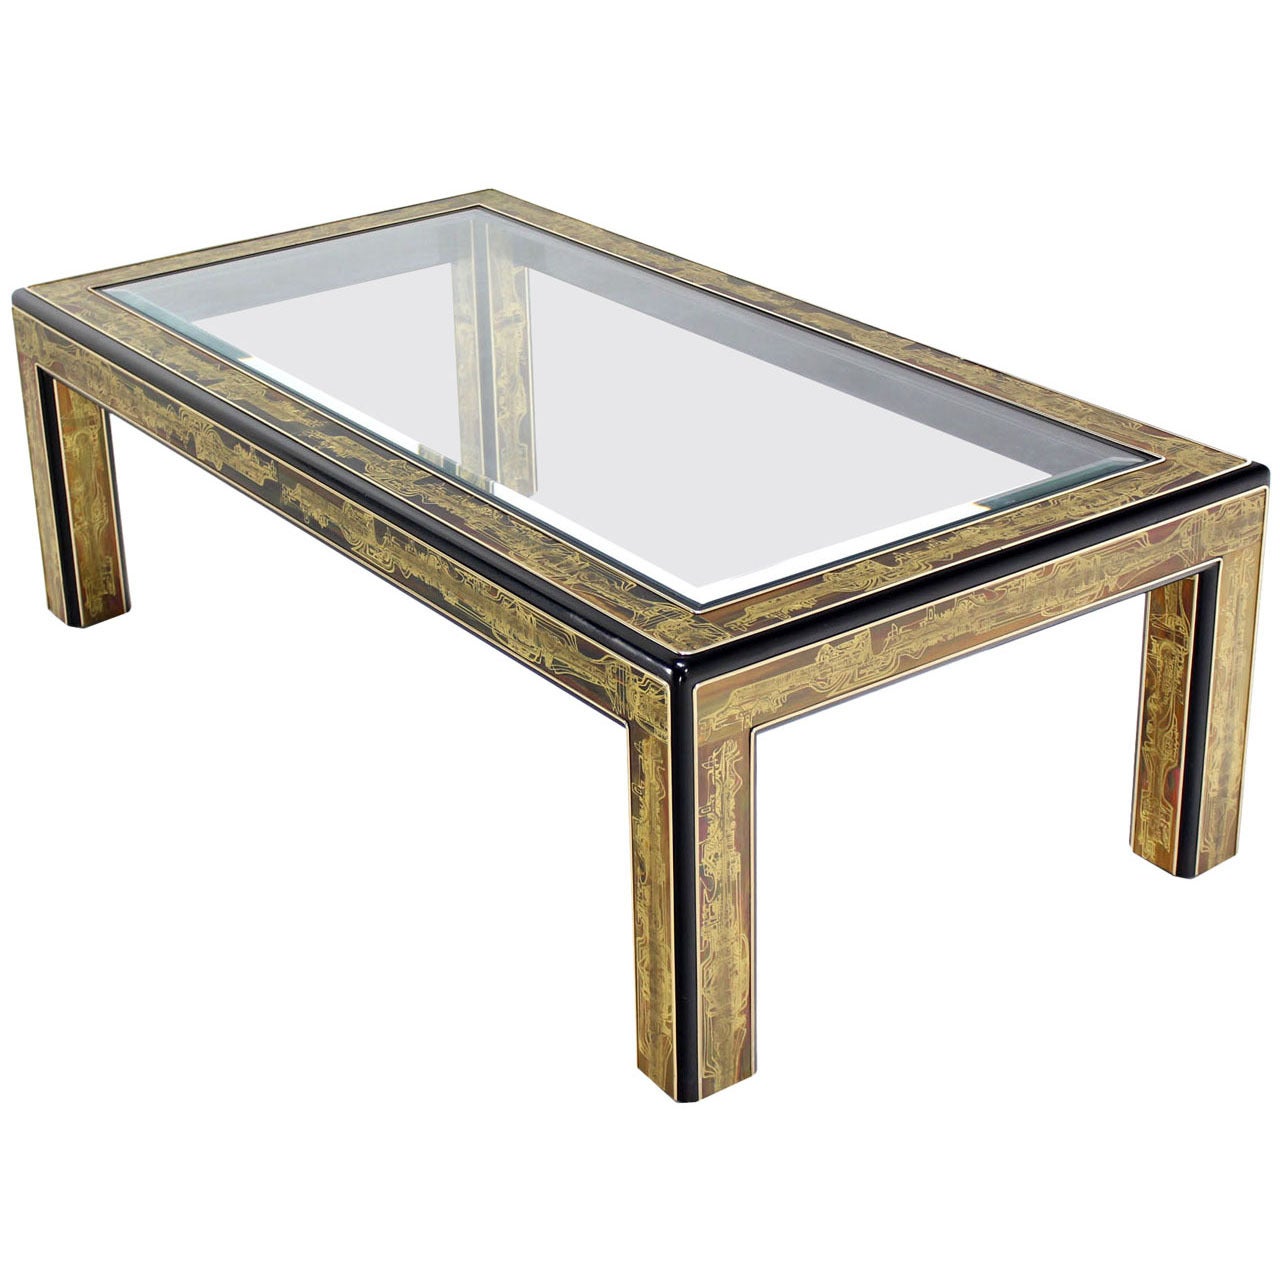 Rectangular Glass-Top Brass and Wood Base Coffee Table by Mastercraft